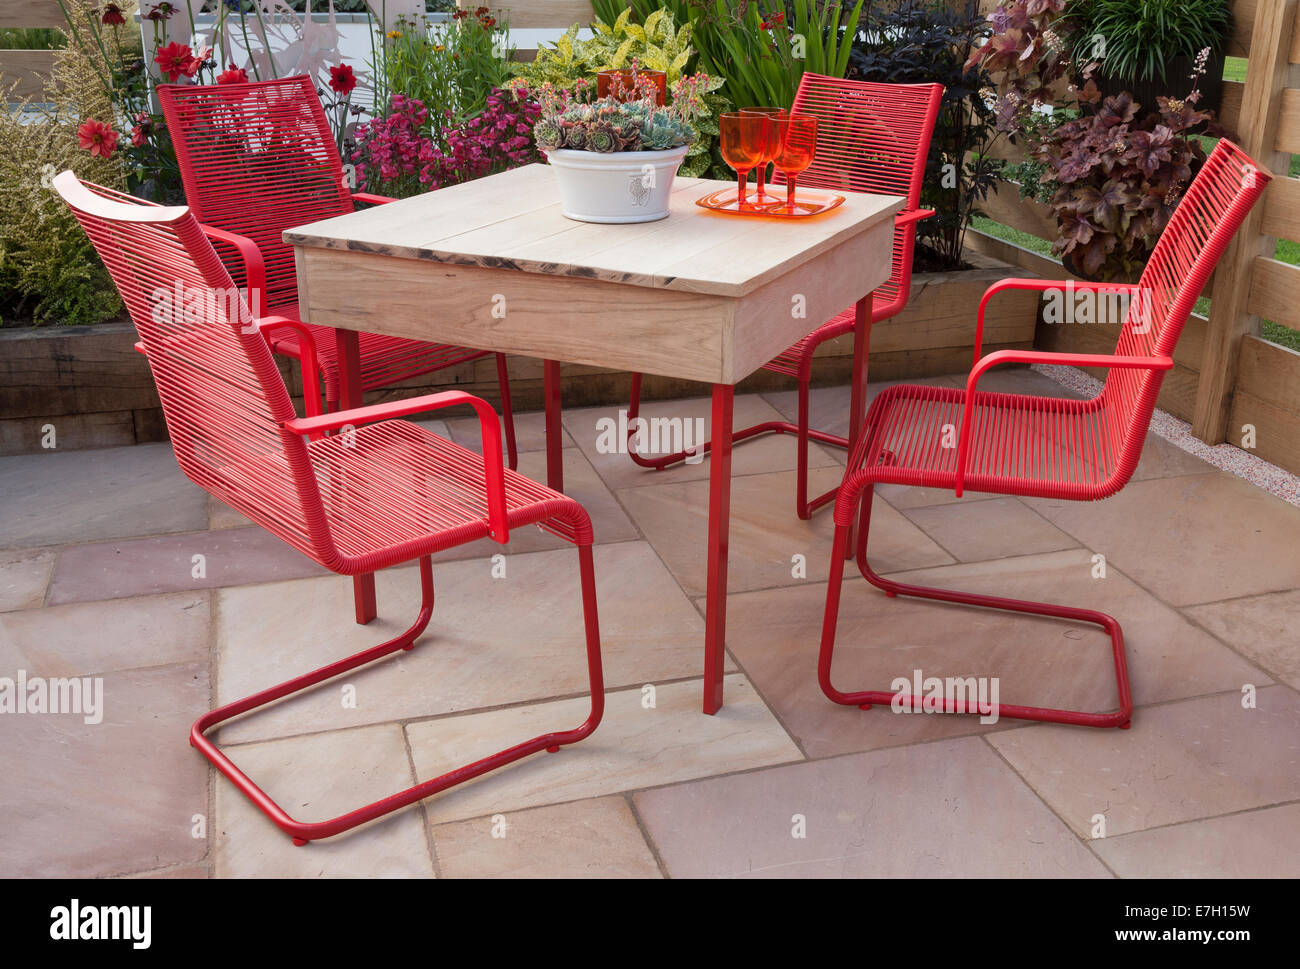 Garden - The Narrows - stone paved patio with table and red chairs plant pot with sempervivum - Designer - Pip Probert - Stock Photo